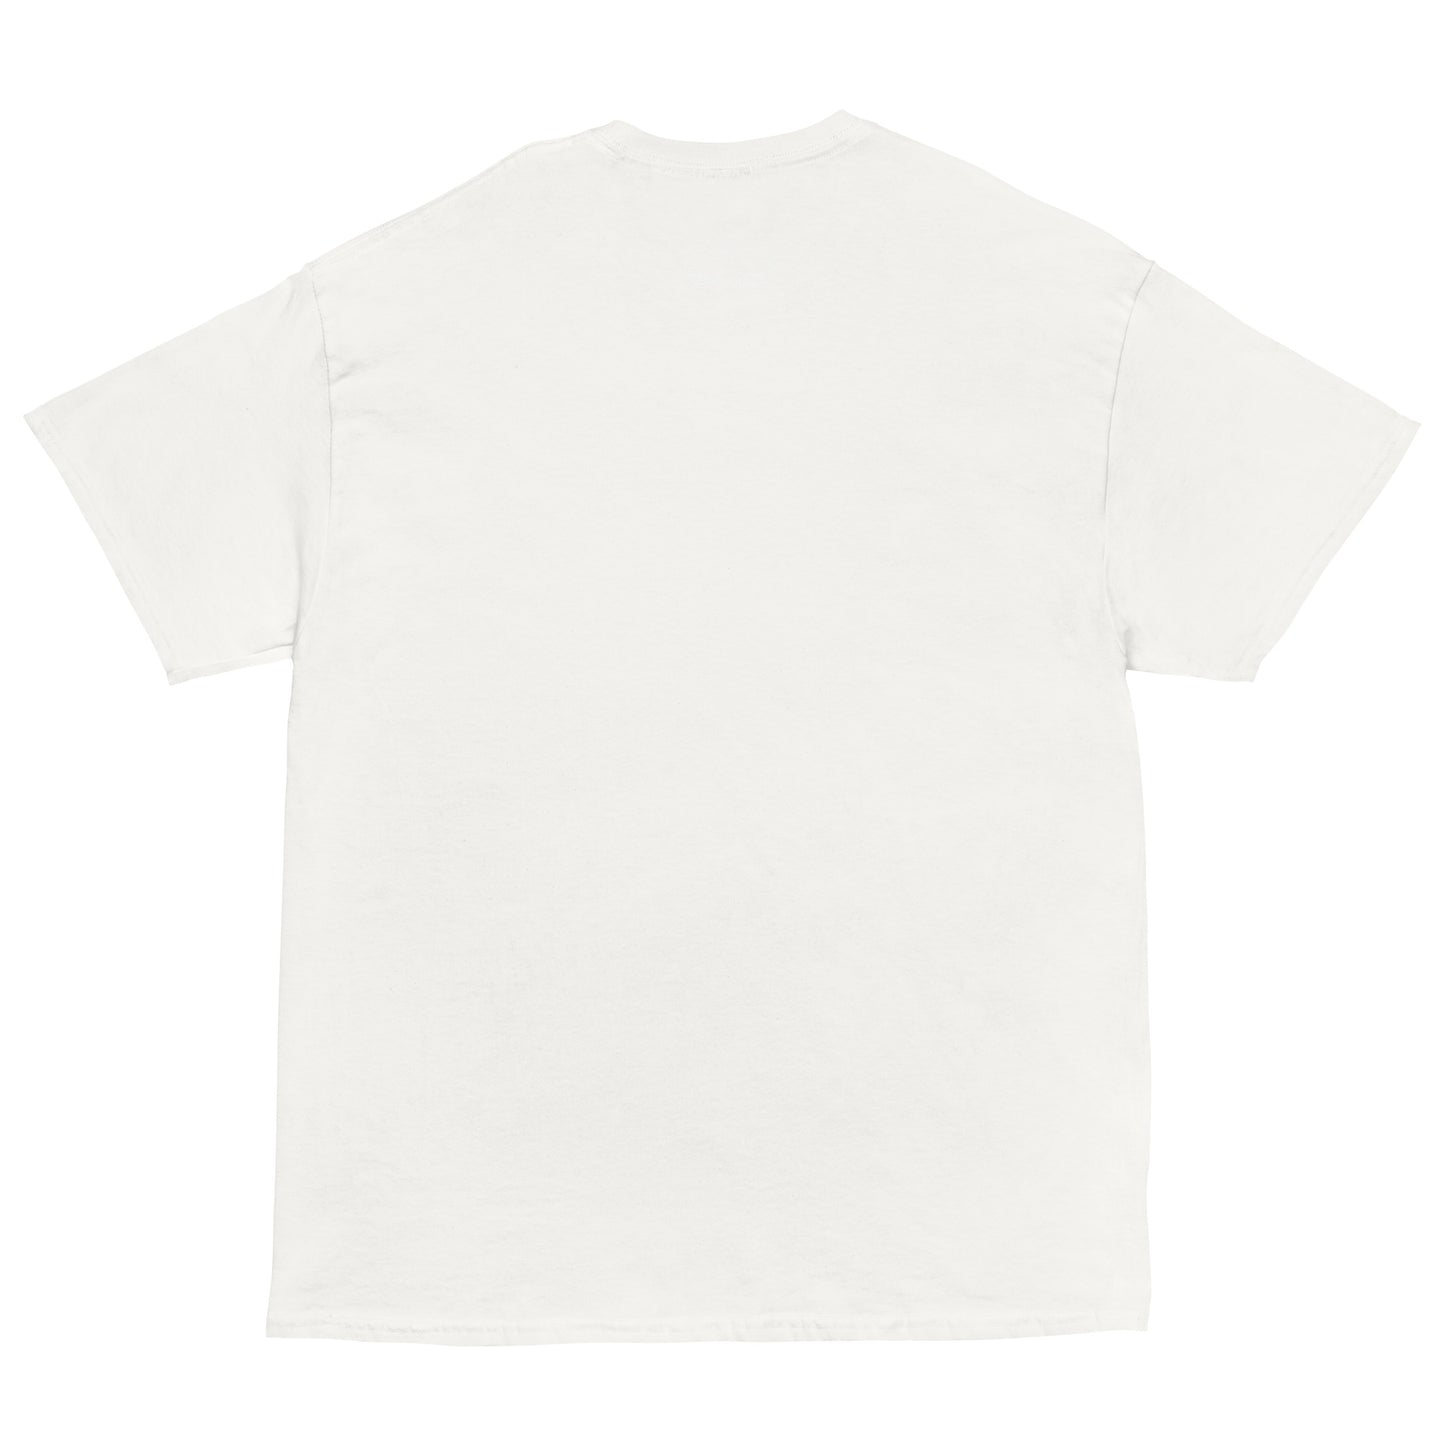 The Architect Tag tee